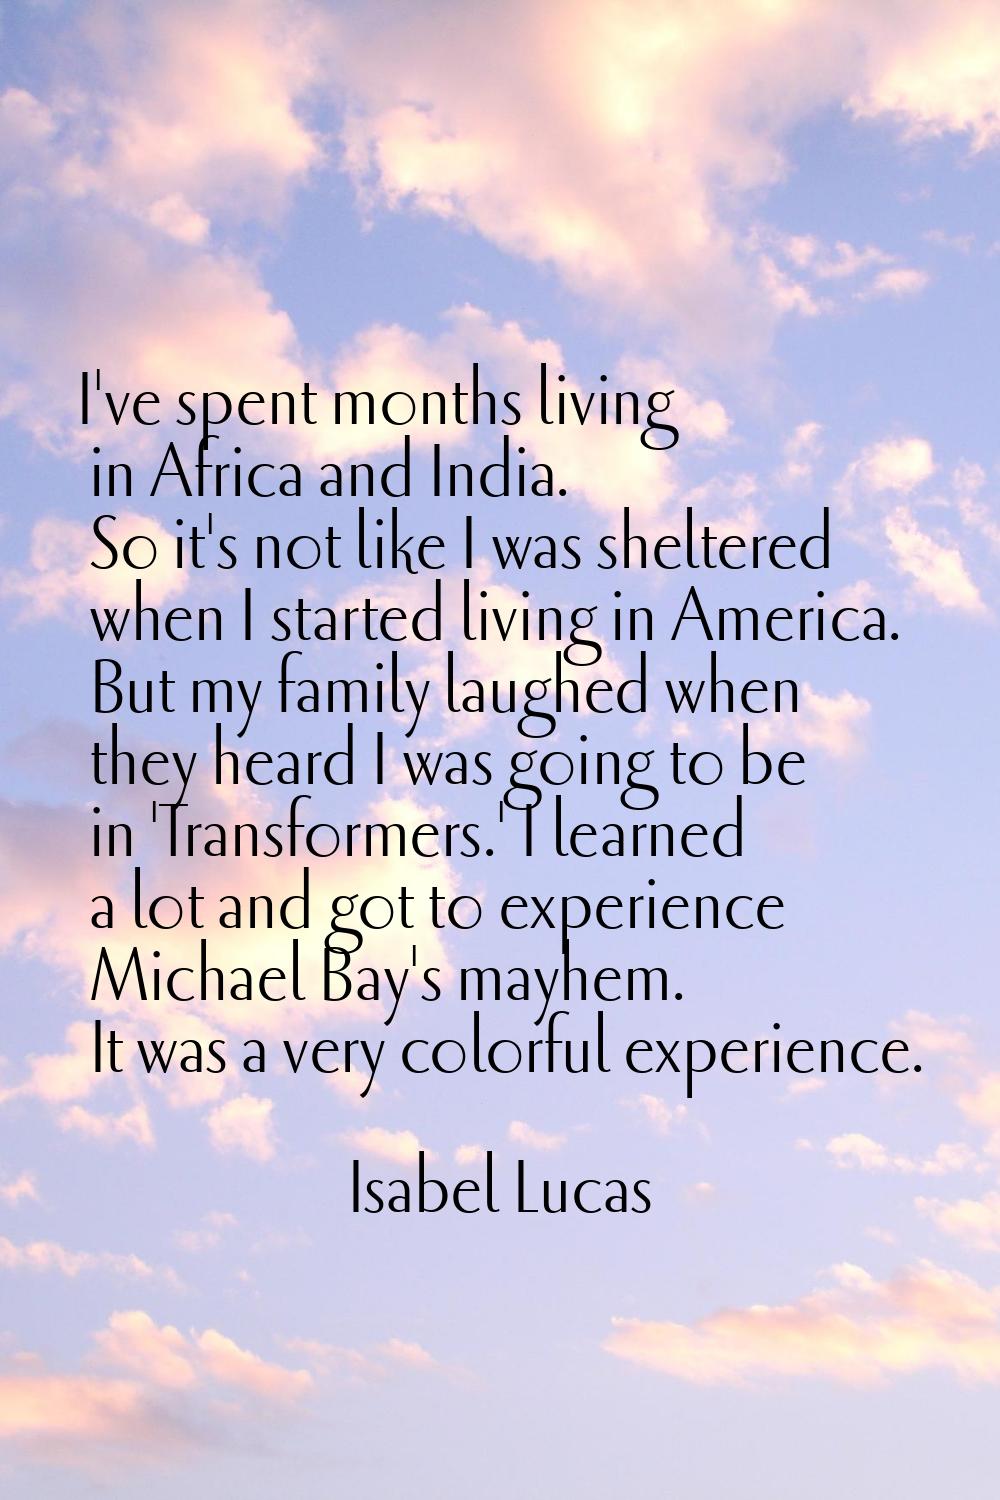 I've spent months living in Africa and India. So it's not like I was sheltered when I started livin